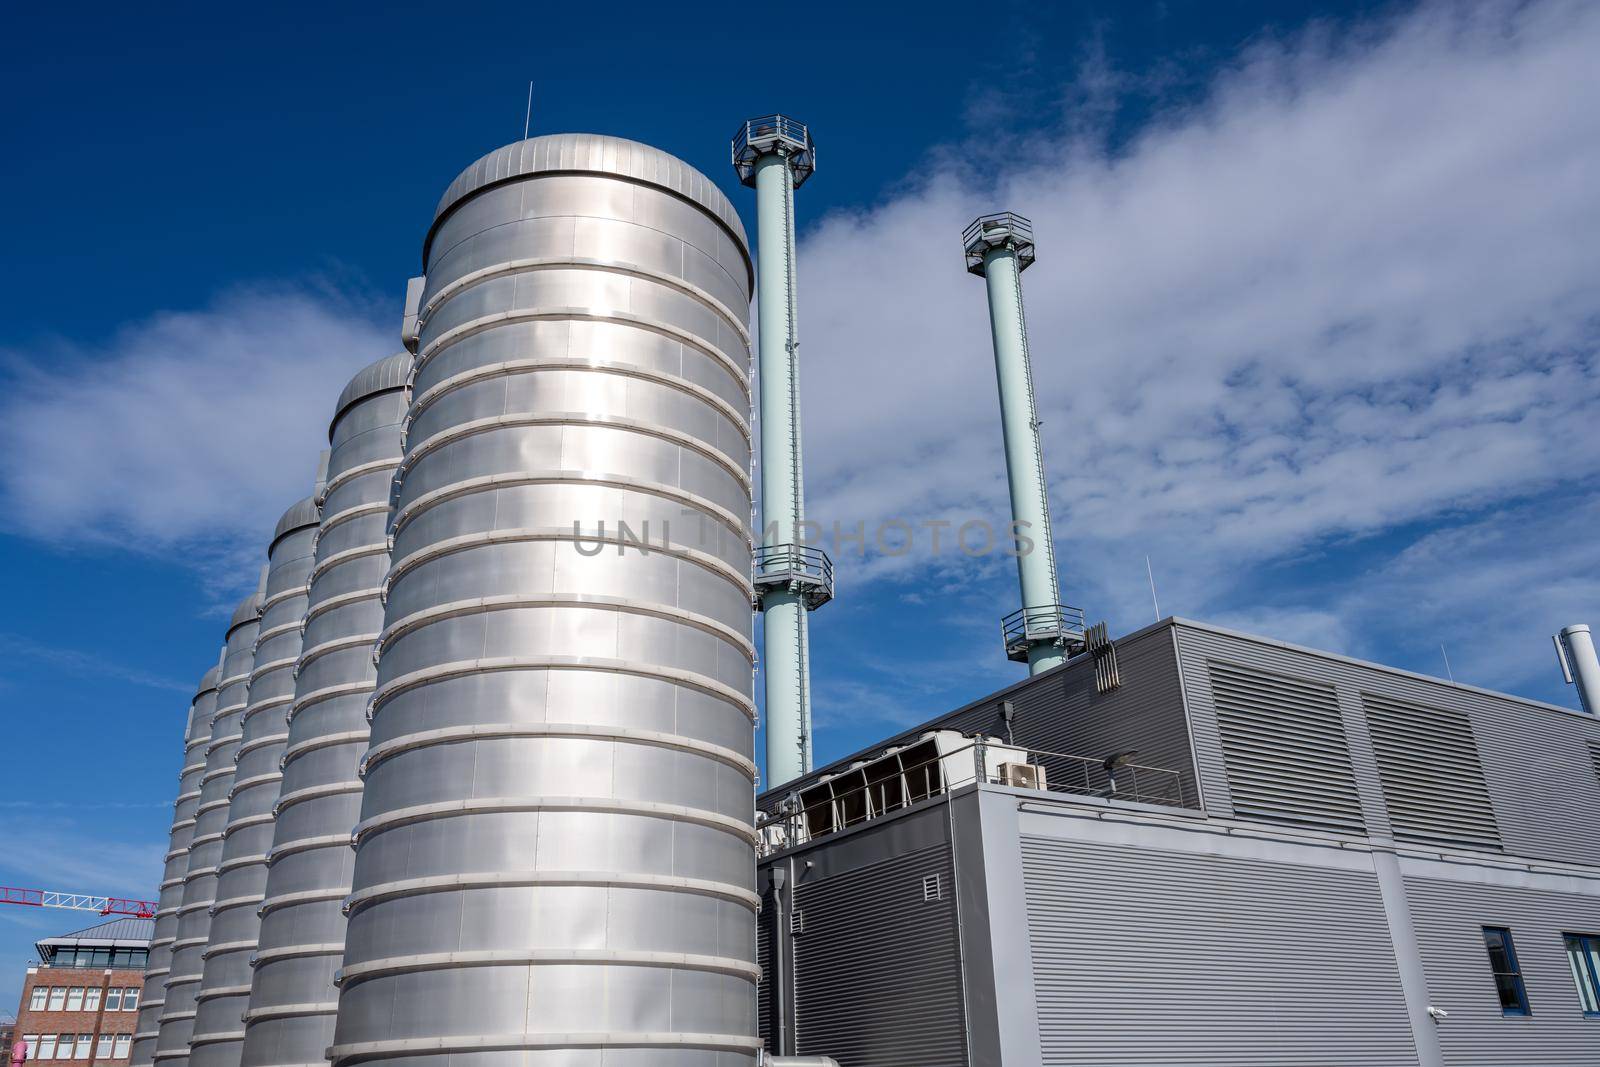 Cogeneration plant in front of a blue sky